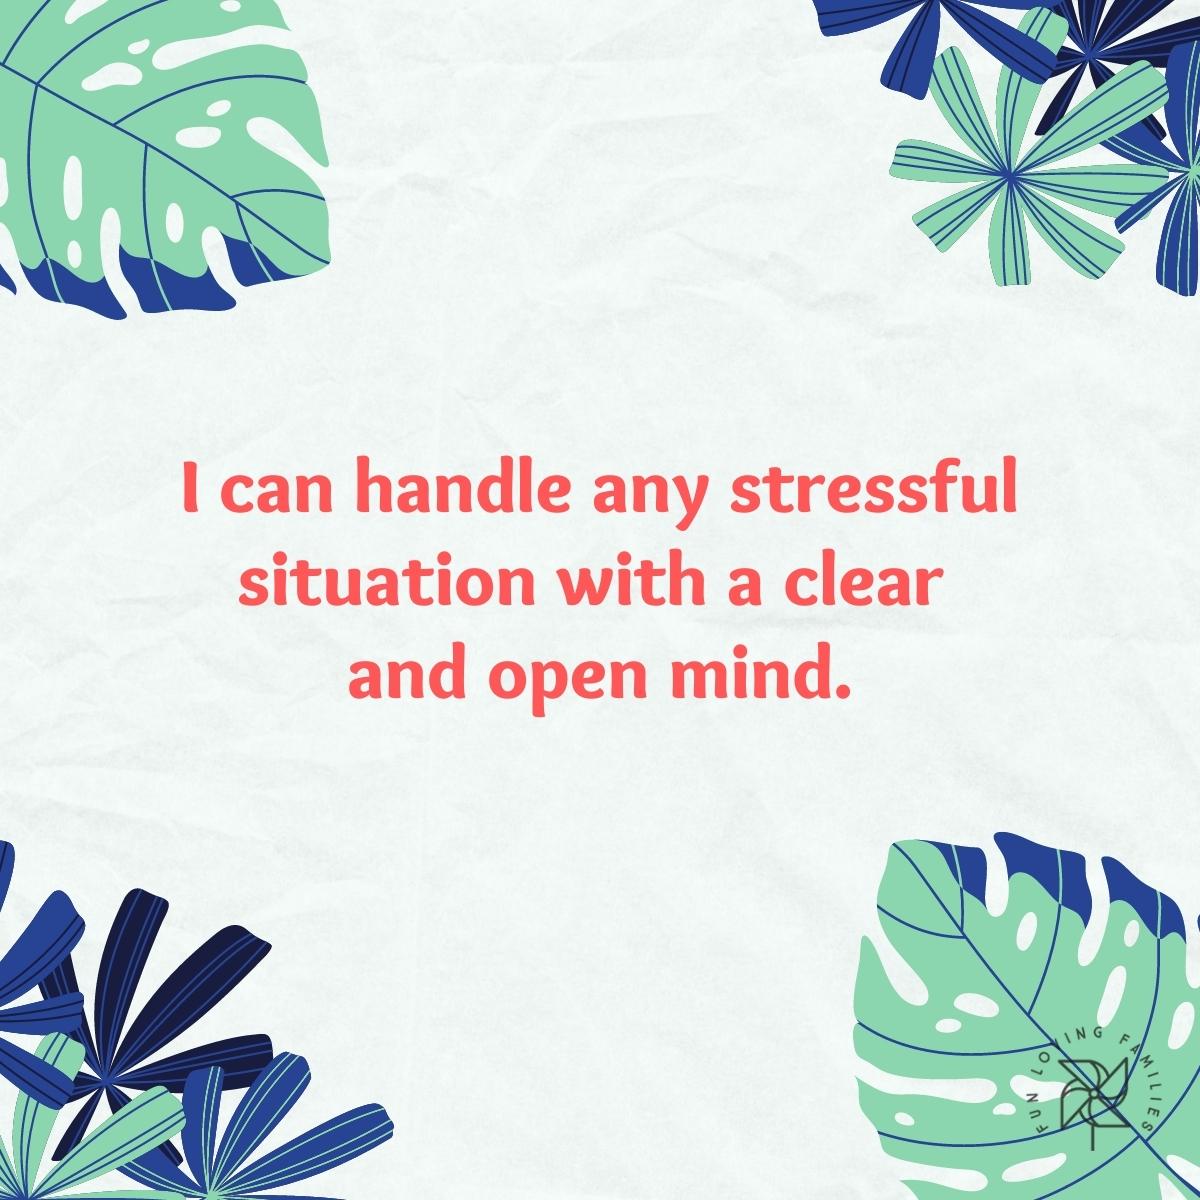 I can handle any stressful situation with a clear and open mind affirmation